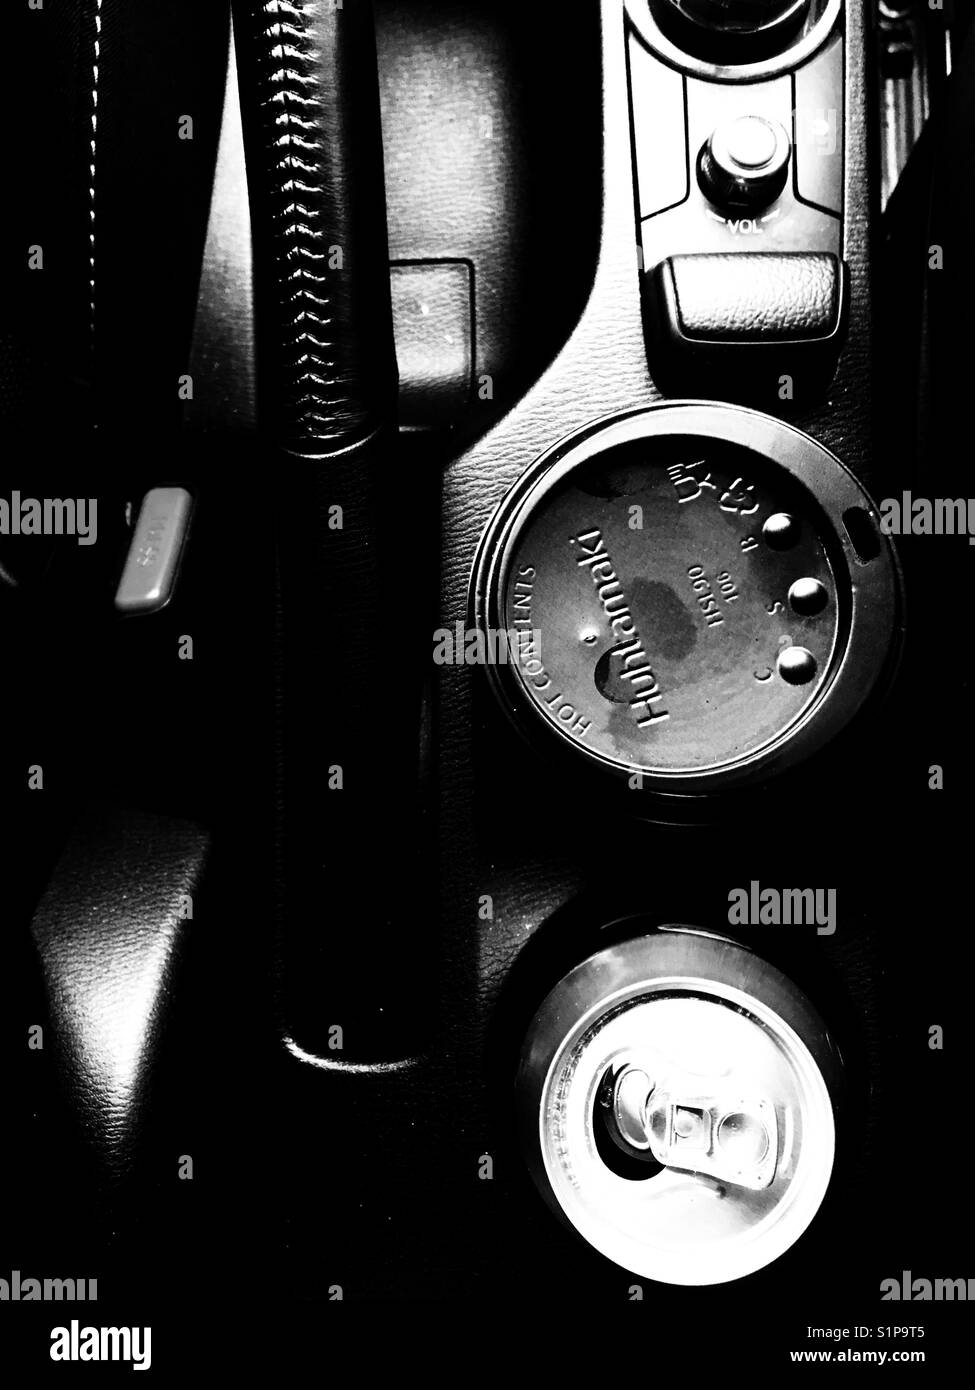 Coffee cup and soft drink can in car cup holders Stock Photo - Alamy